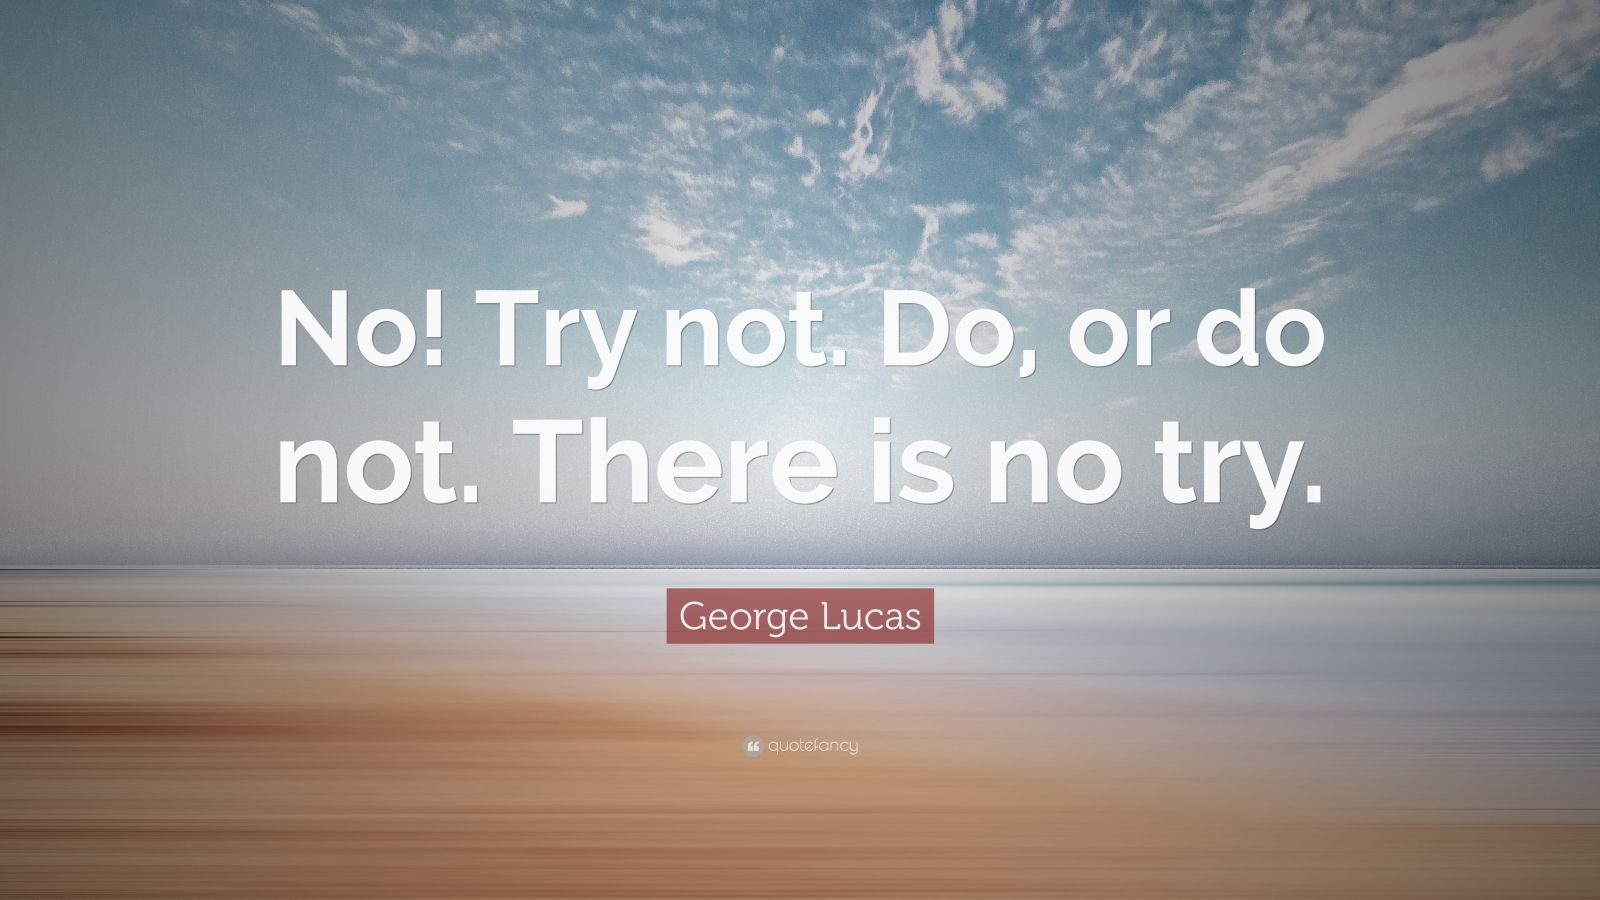 George Lucas Quote: “No! Try not. Do, or do not. There is no try.” (11